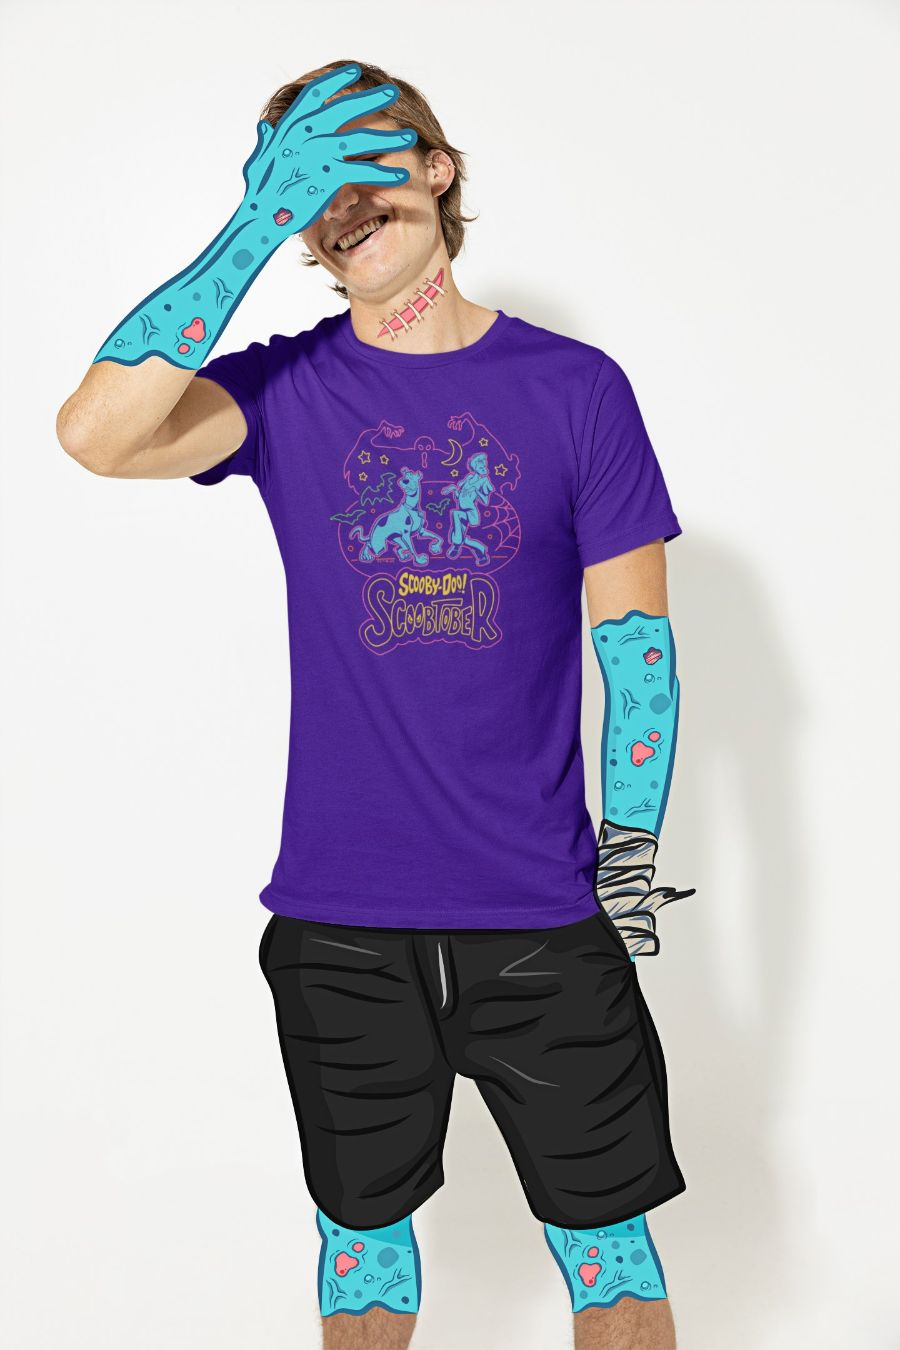 SD-Scoobtober_bella-canvas-t-shirt-mockup-of-a-man-with-zombie-like-illustrations-m15176